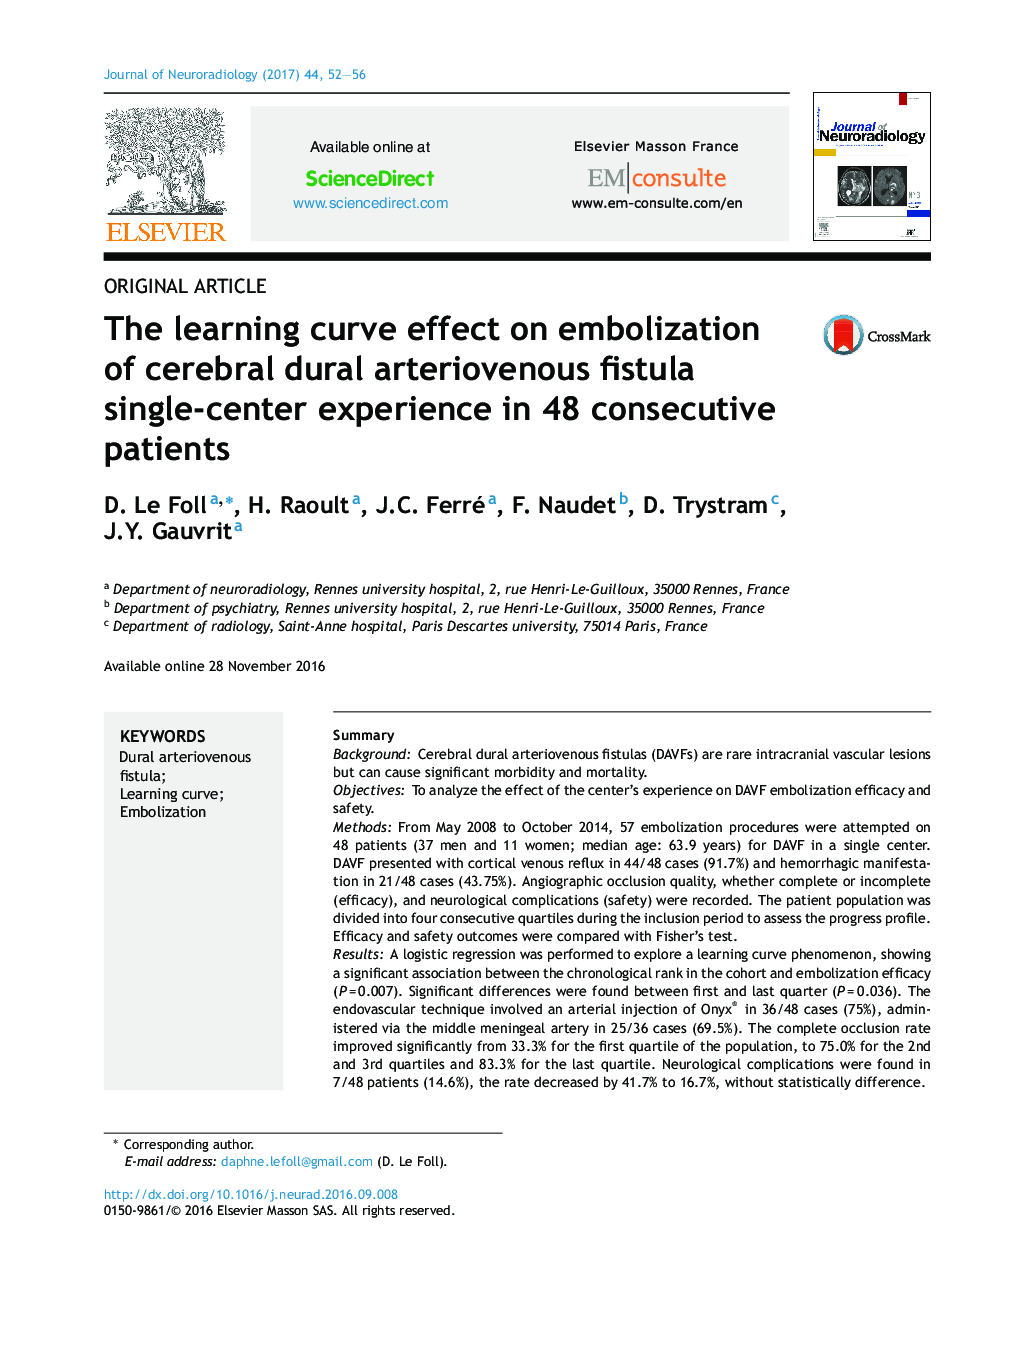 Original ArticleThe learning curve effect on embolization of cerebral dural arteriovenous fistula single-center experience in 48Â consecutive patients